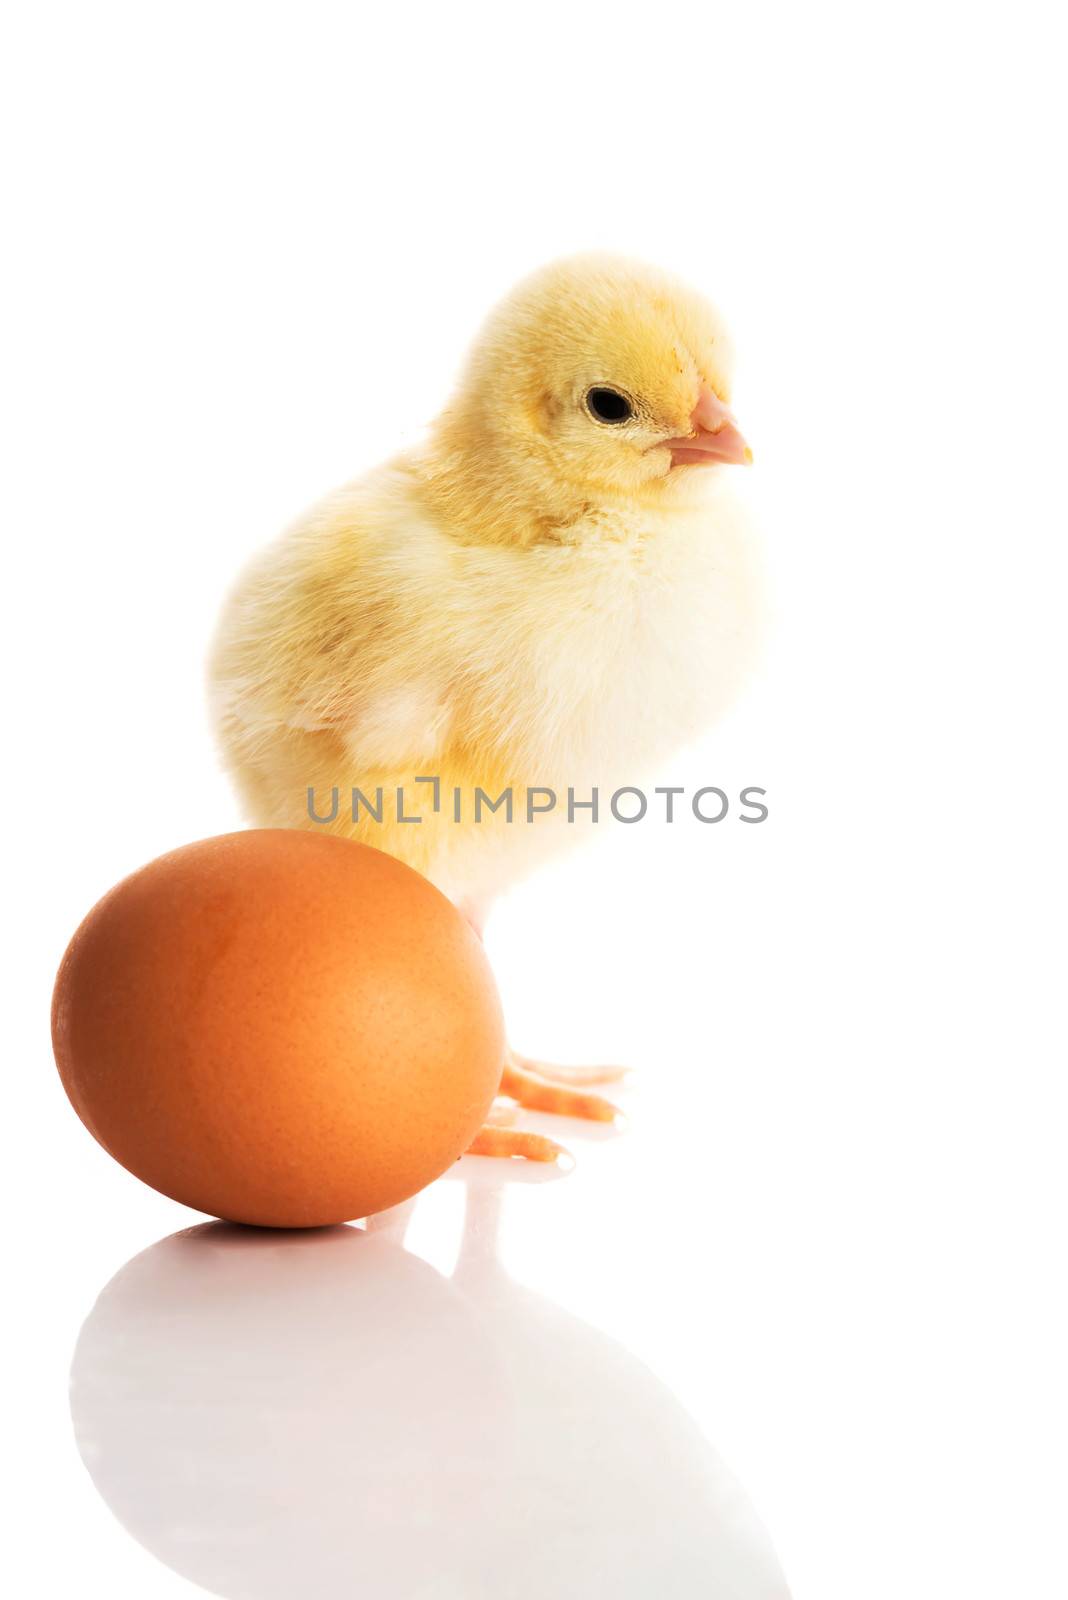 Small yellow chick with egg. Isolated on white.